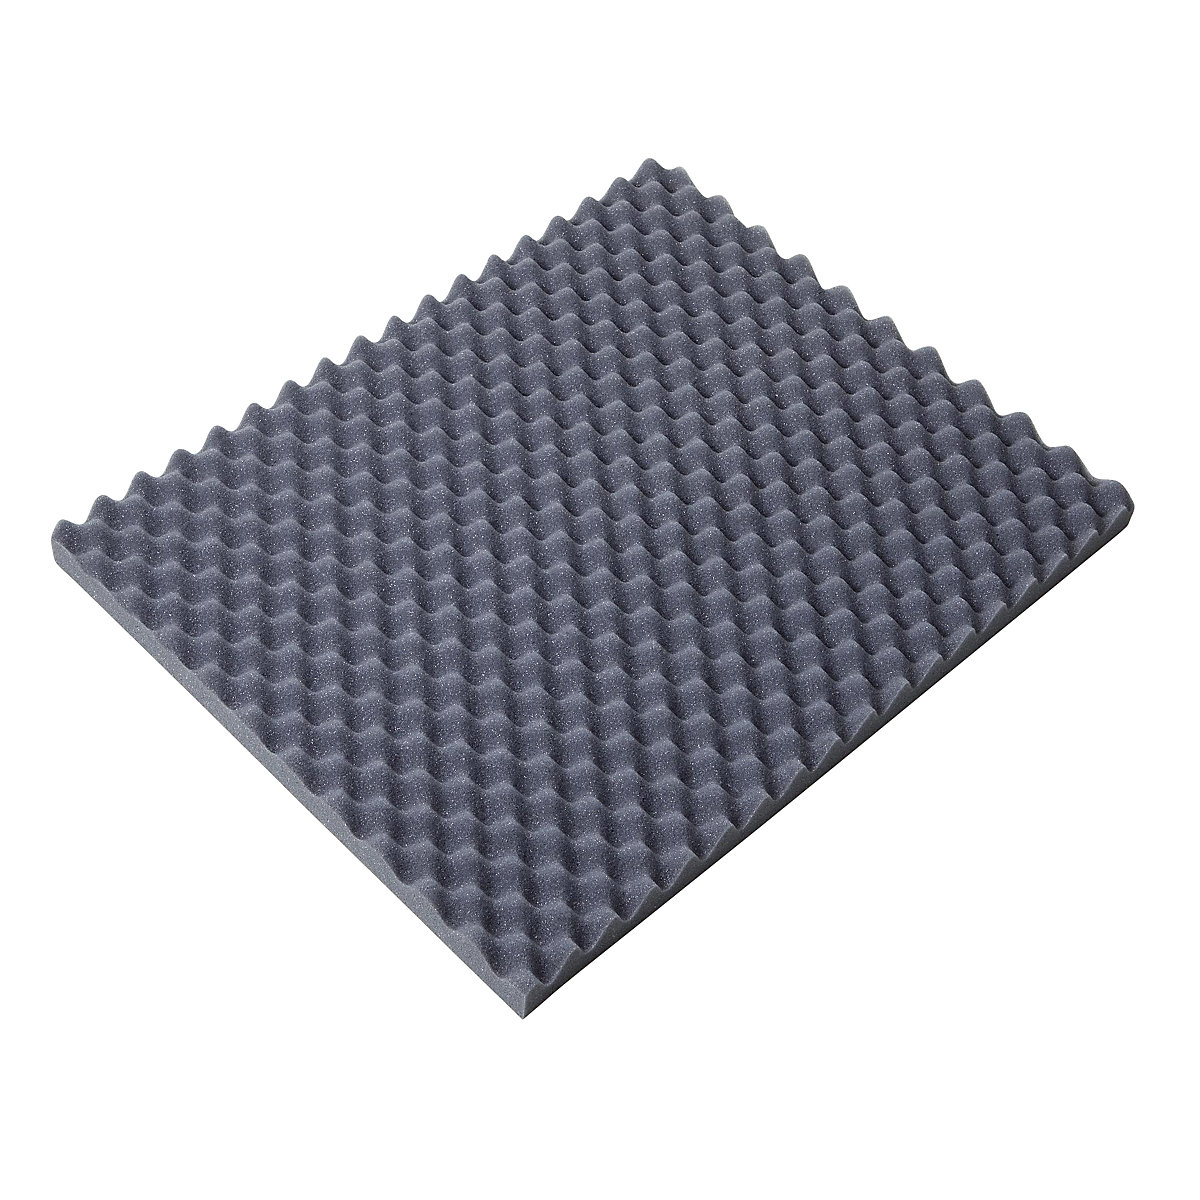 Egg crate foam sheet, 40 mm thick, LxW 600 x 400 mm, pack of 26-6